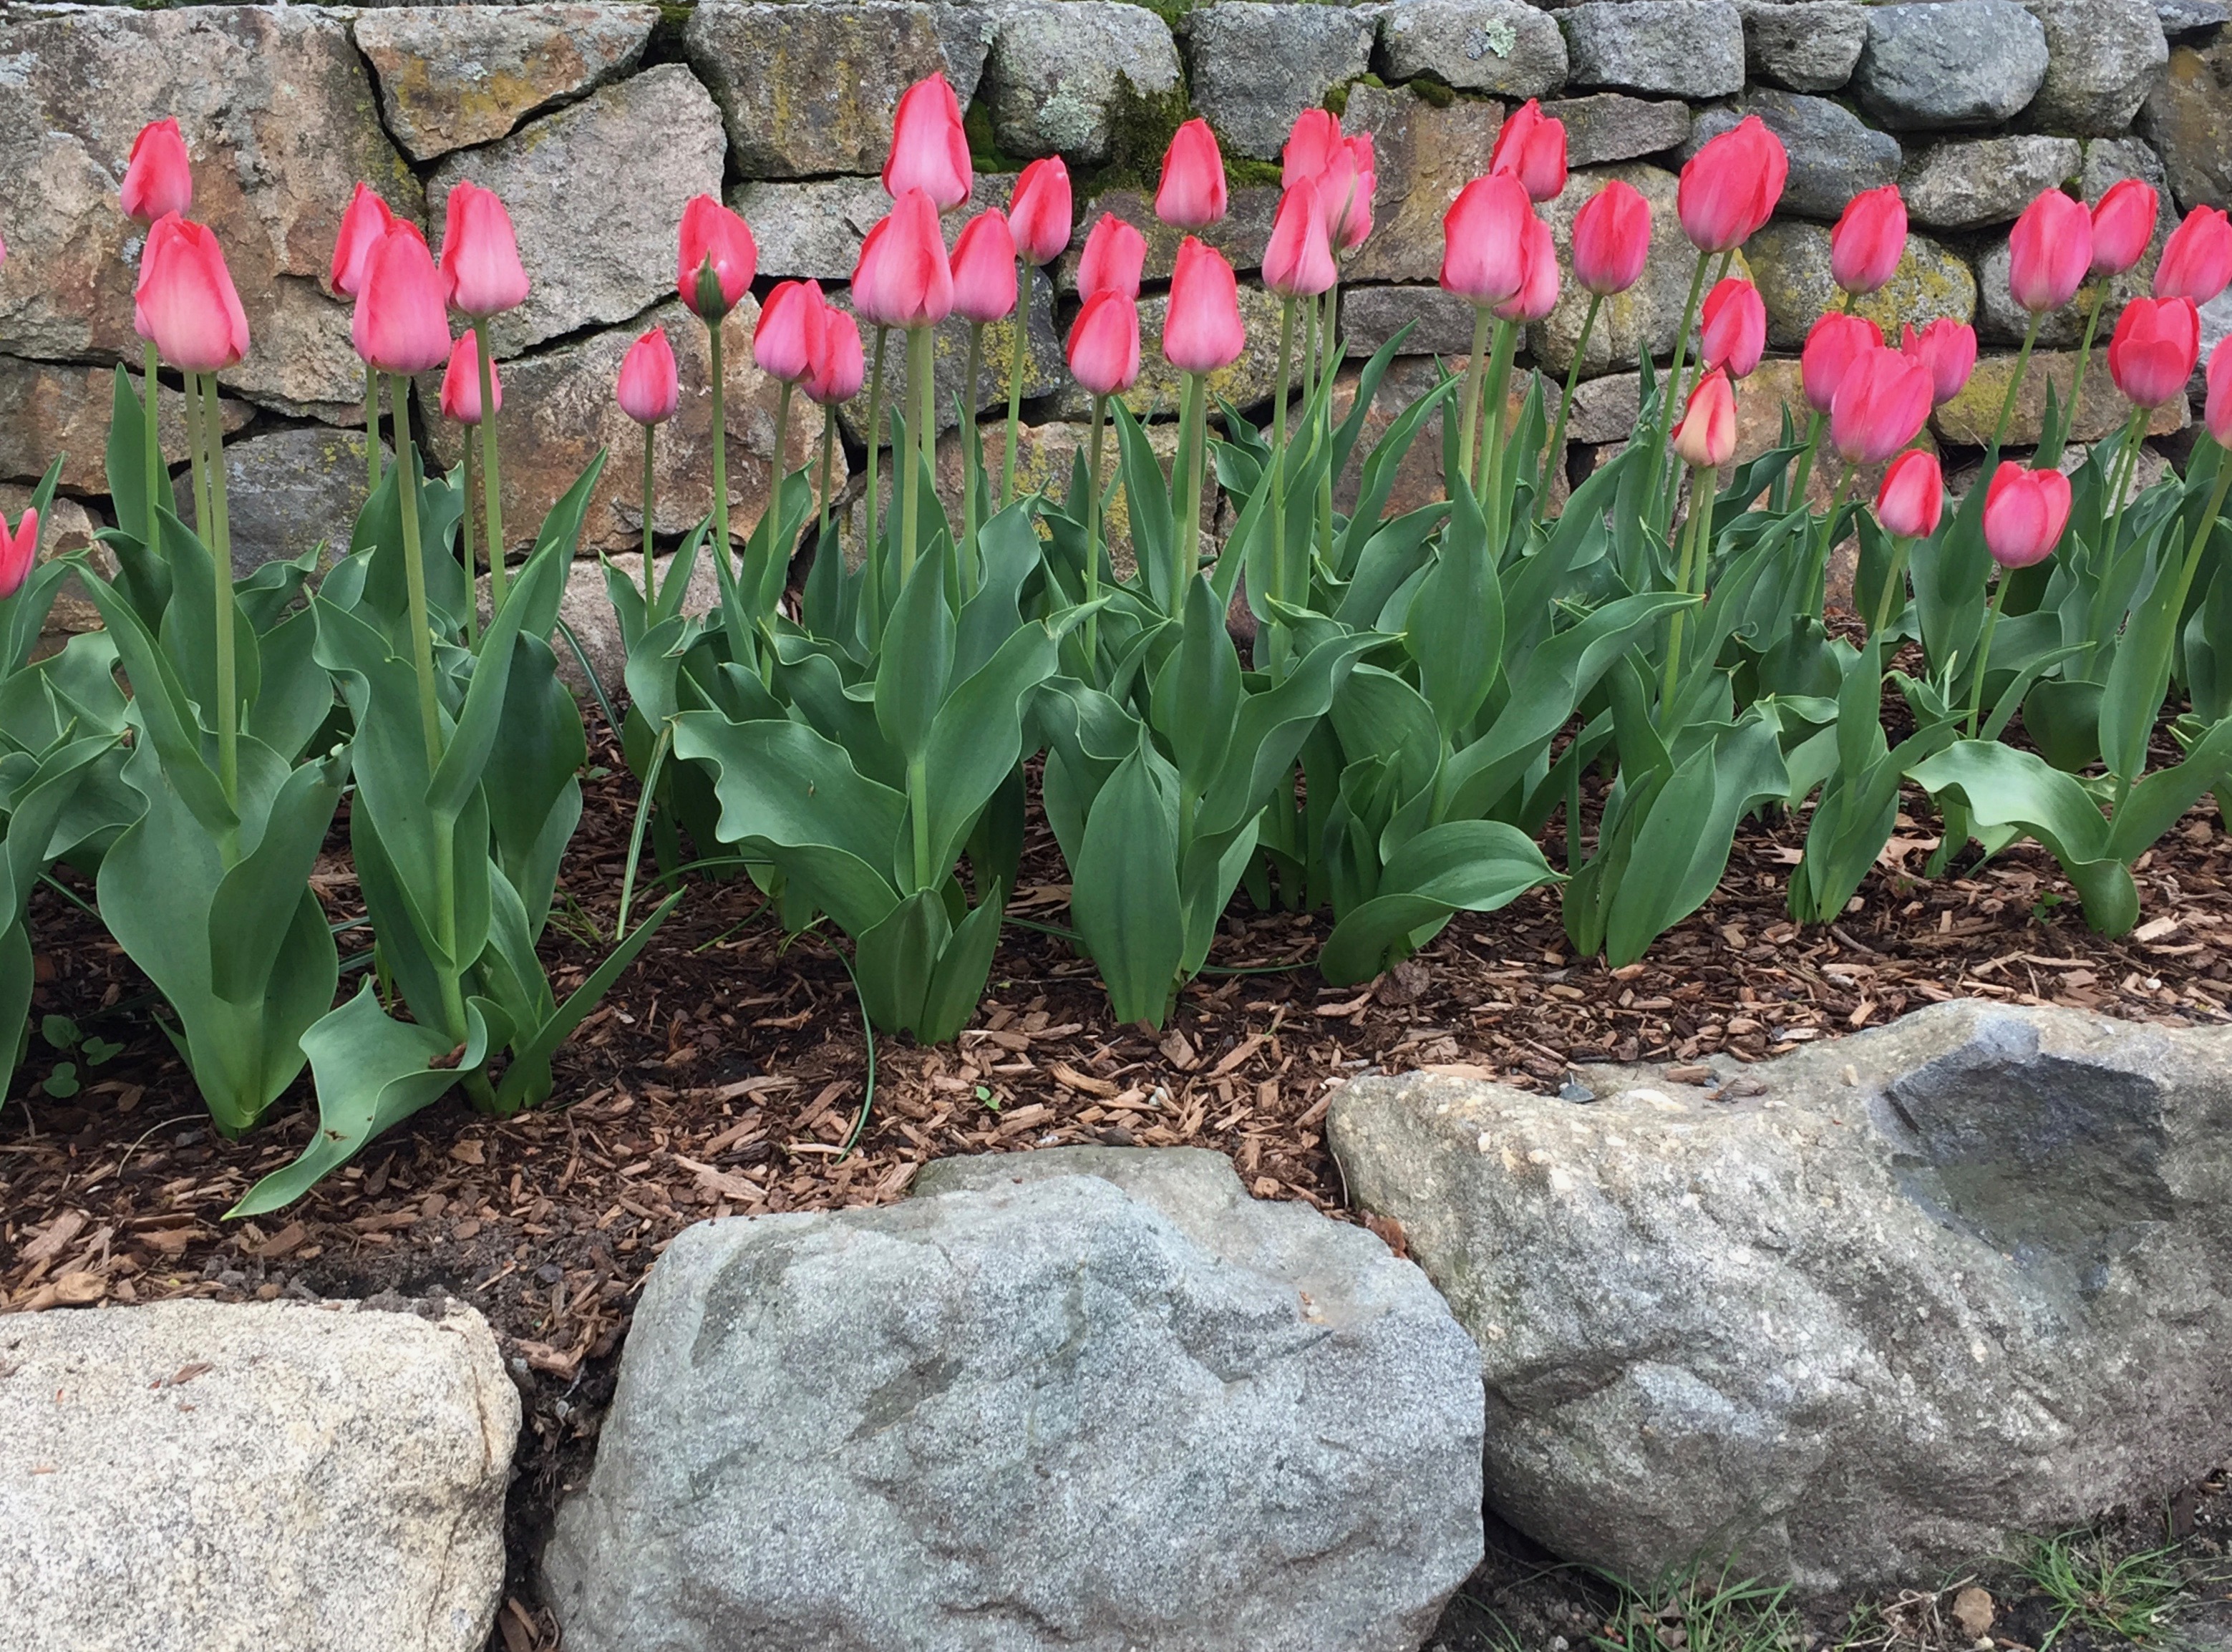 It's the Weekend!, Number 103, Pink Tulips Line a Stone Wall